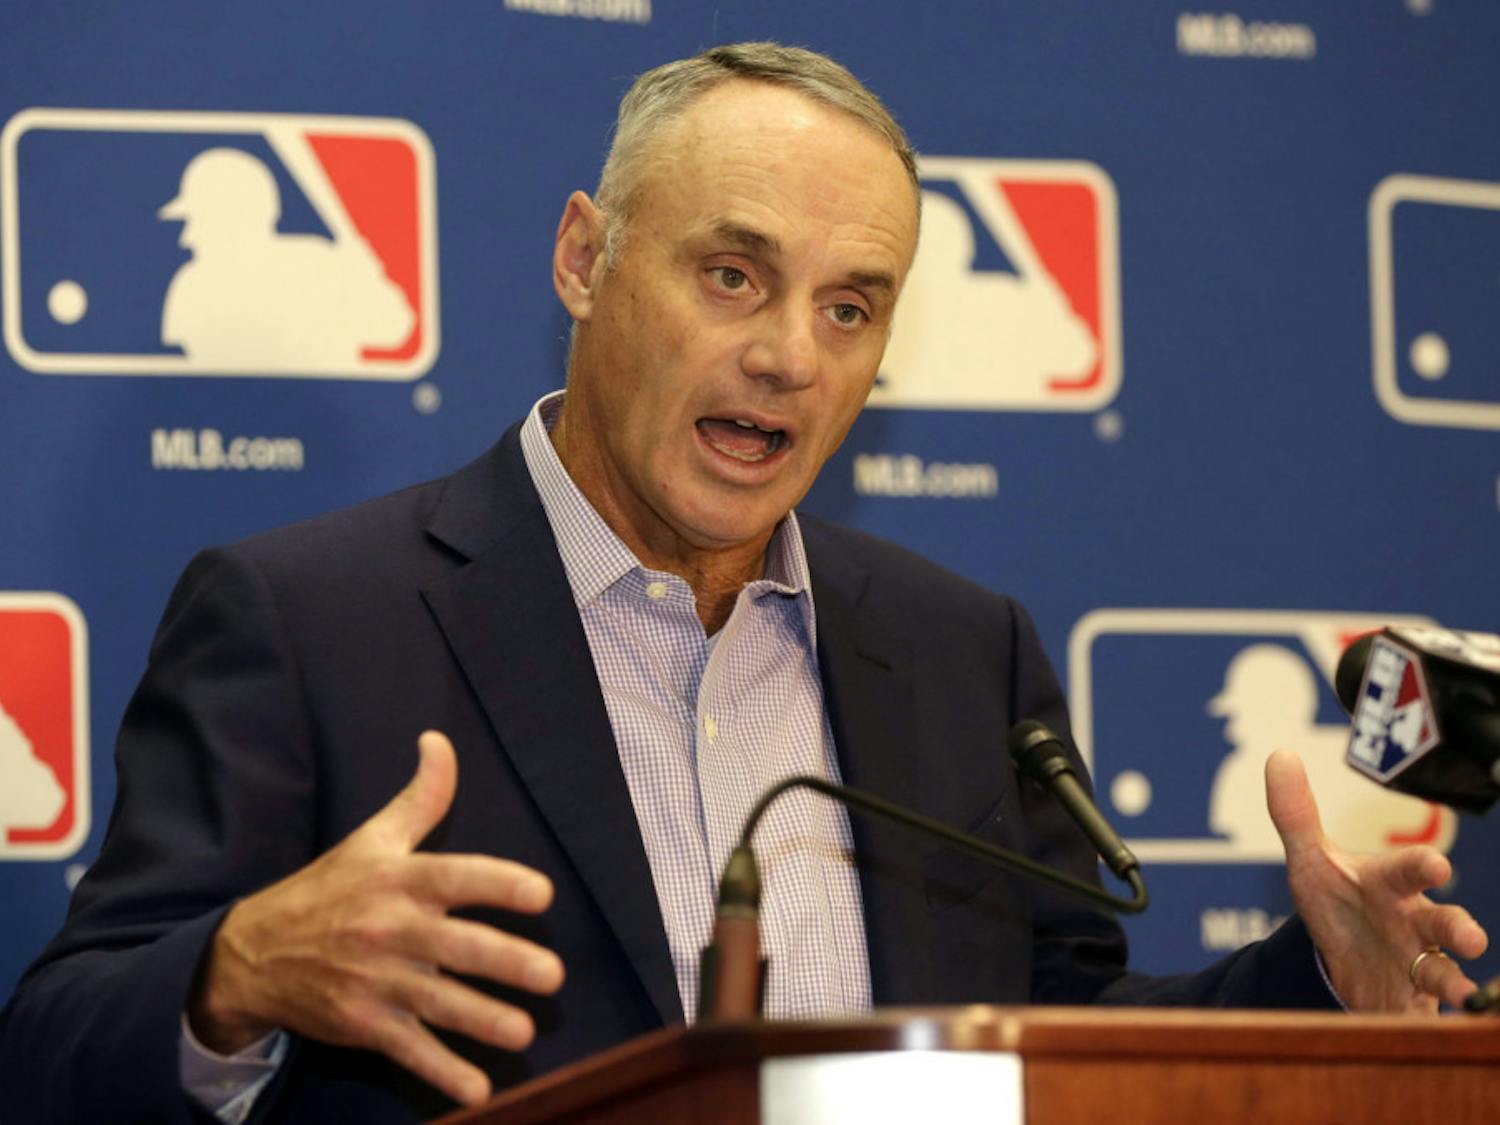 Major League Baseball Commissioner Rob Manfred speaks during a news conference following a meeting with MLB owners, Friday, Feb. 3, 2017, in Palm Beach, Fla. (AP Photo/Lynne Sladky)